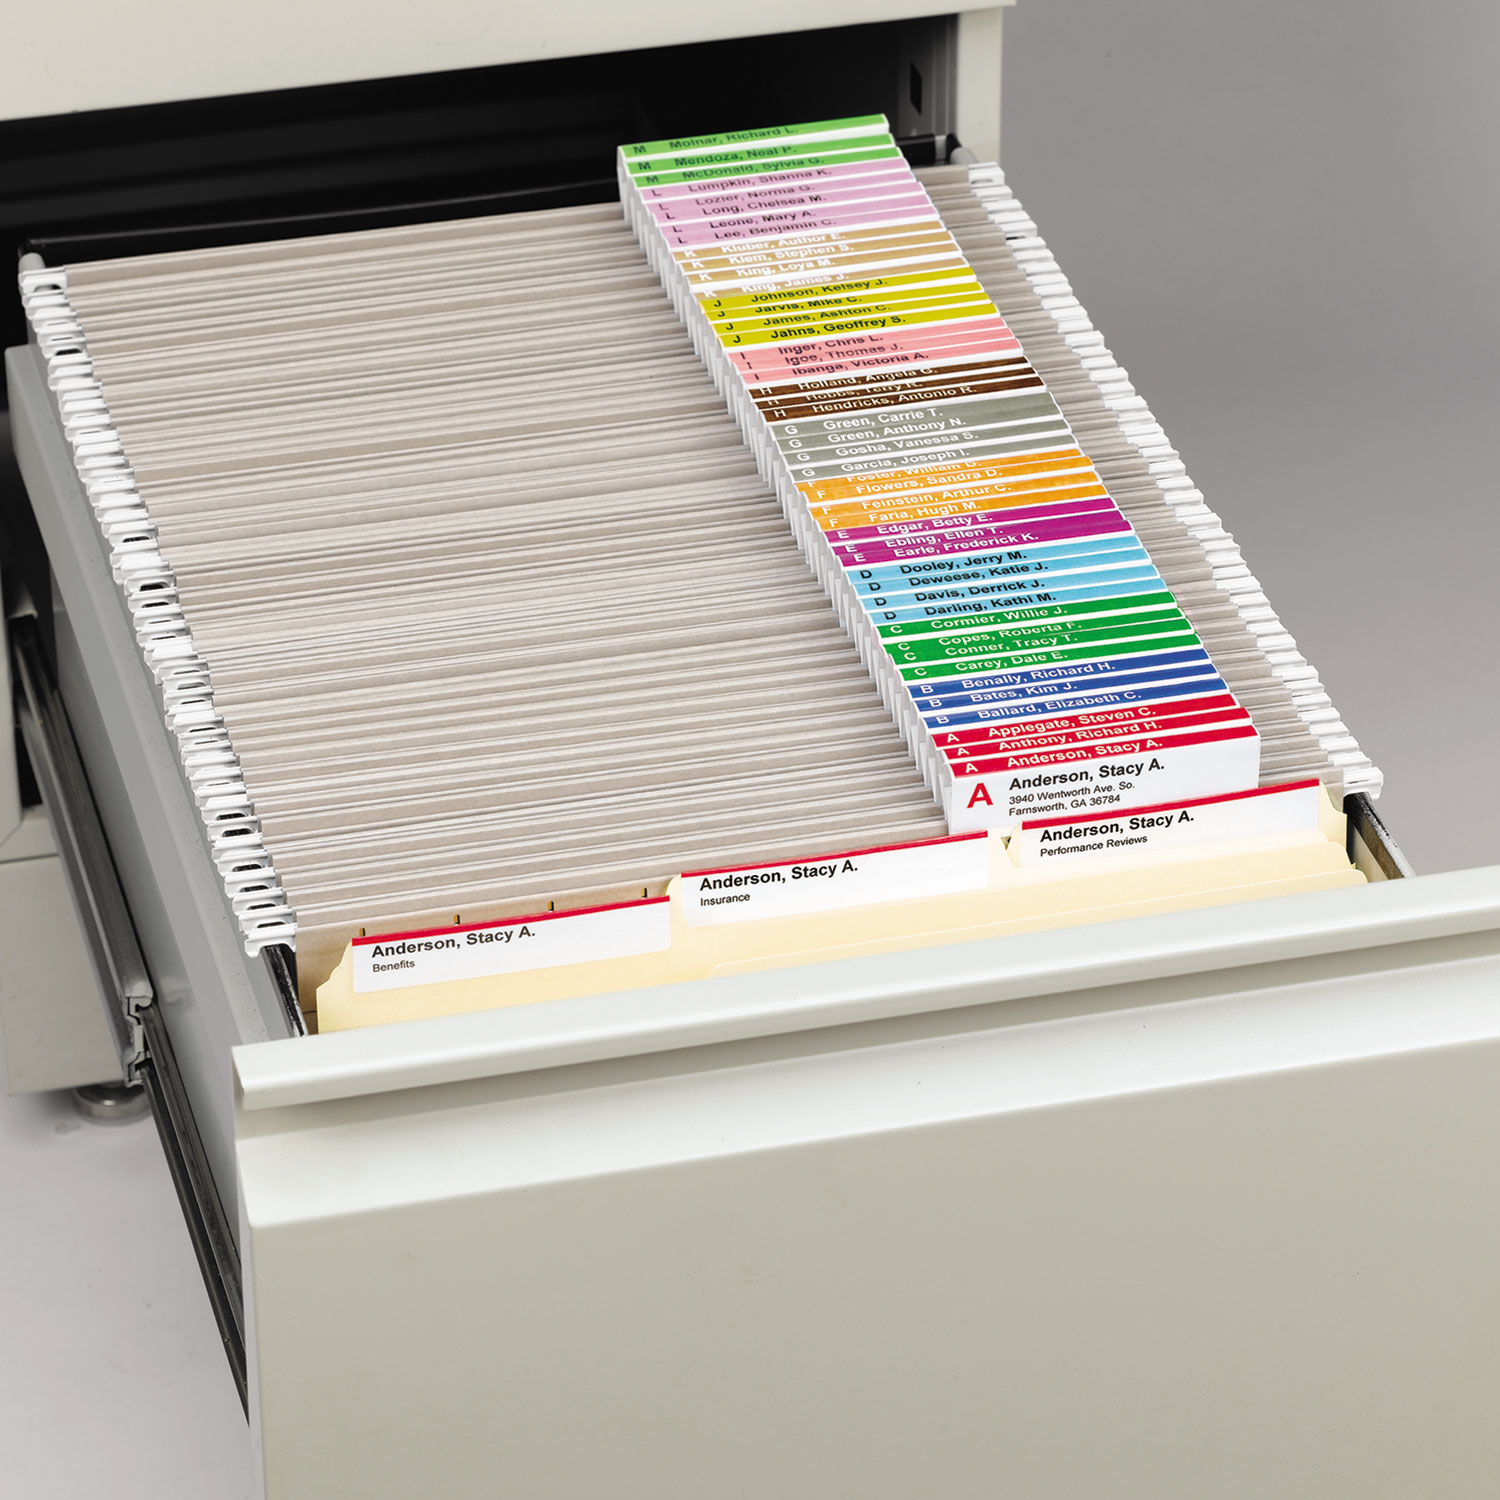 Viewables Hanging Folder Tabs and Labels by Smead® SMD64910